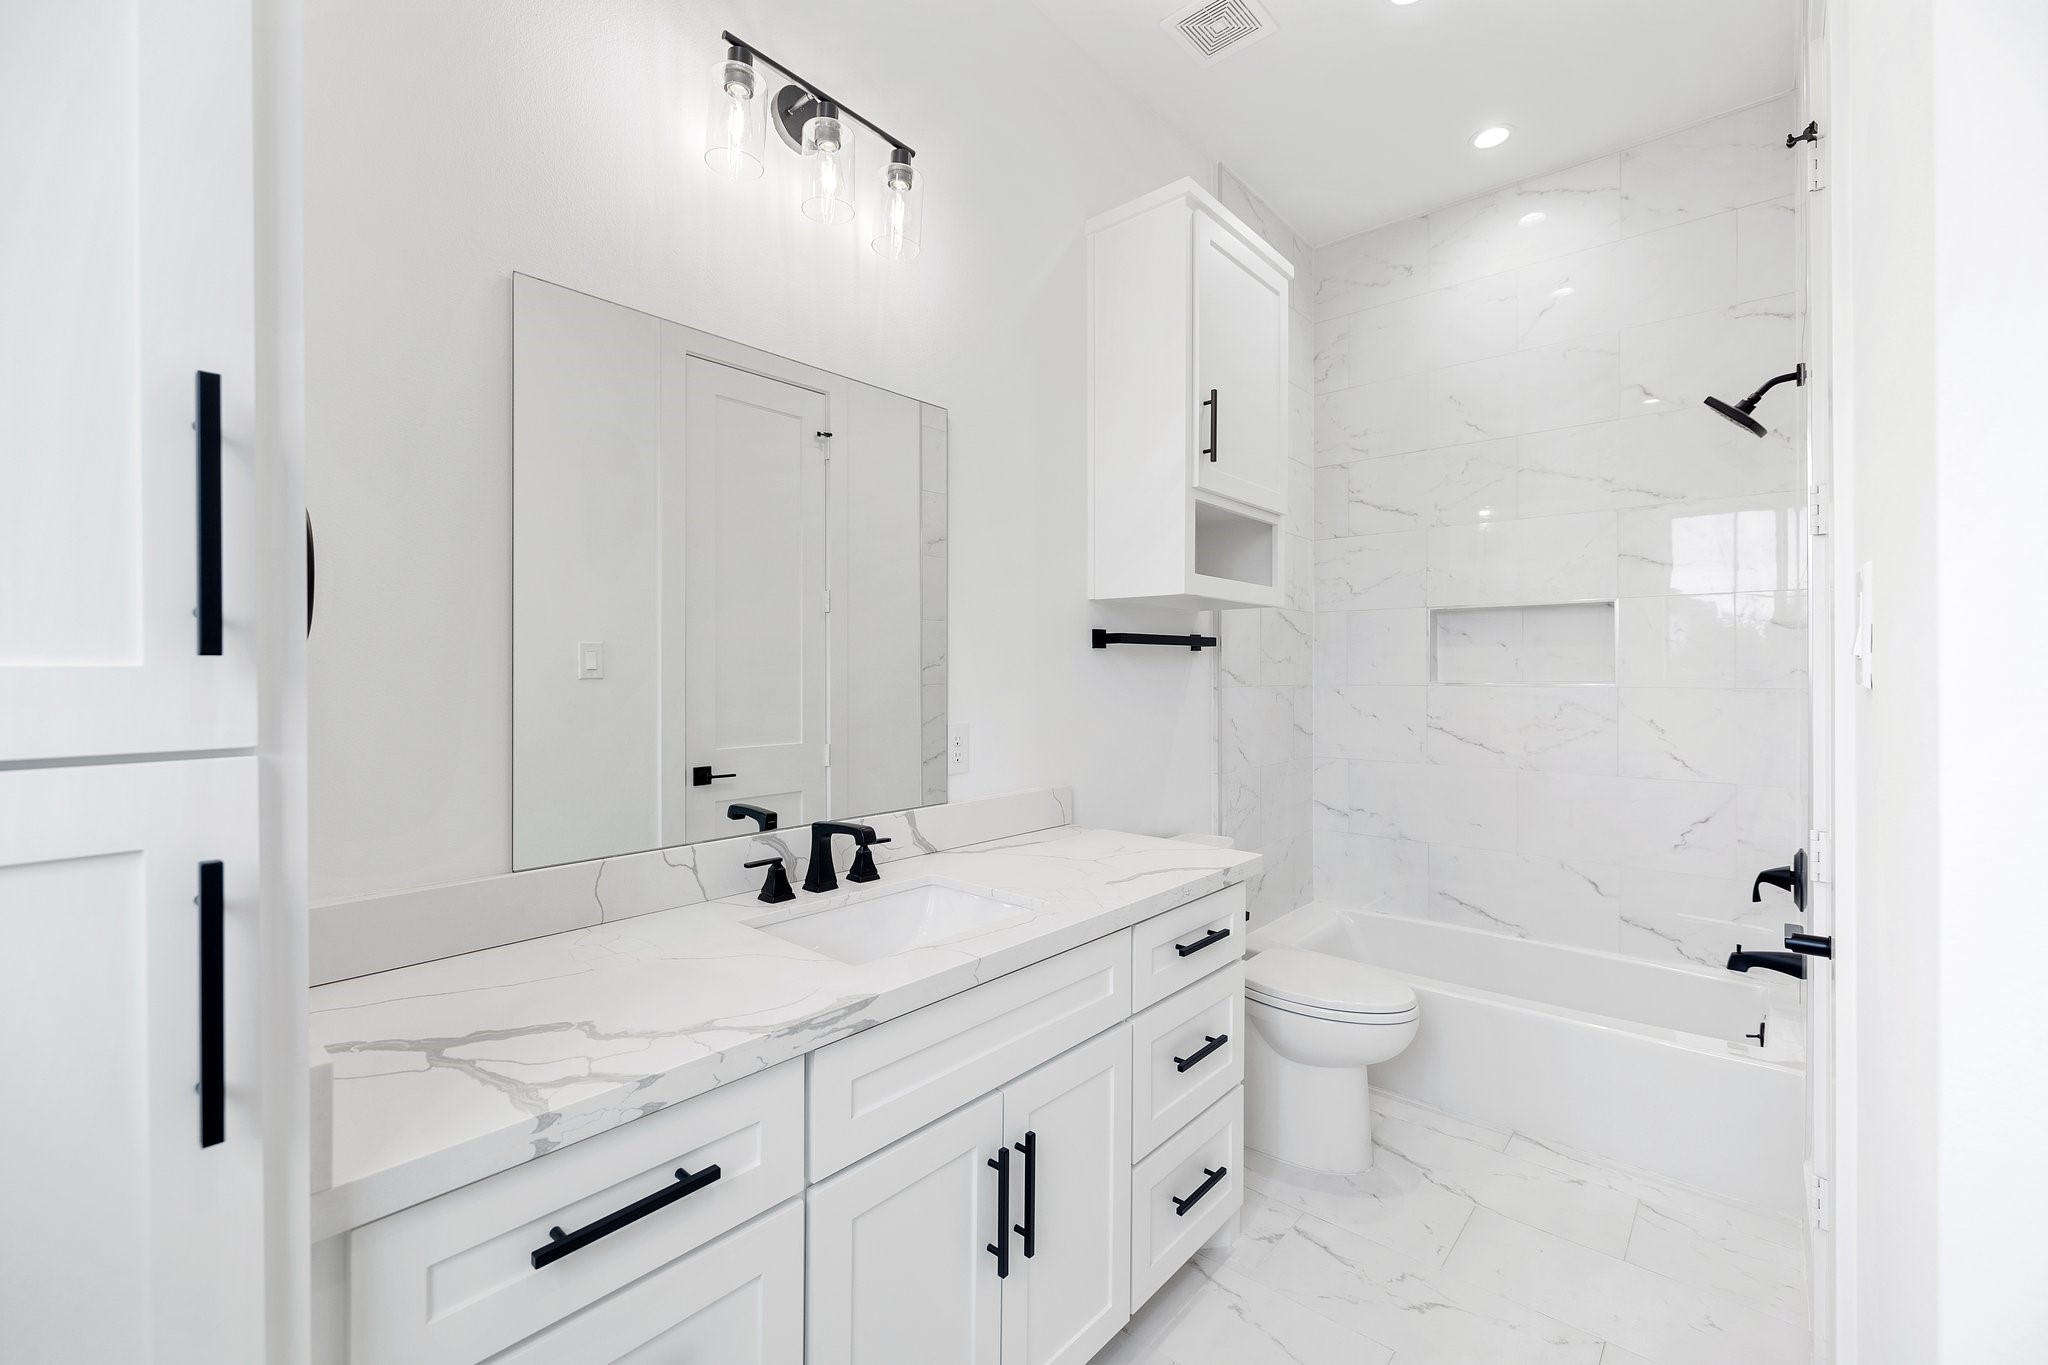 This ensuite bathroom is generously sized with ample cabinet space and an extra countertop for practicality. It features both a shower niche and a tub-shower combo, perfect for the little ones. Beyond, a spacious walk-in closet awaits with additional built-ins, combining functionality and style for your convenience.